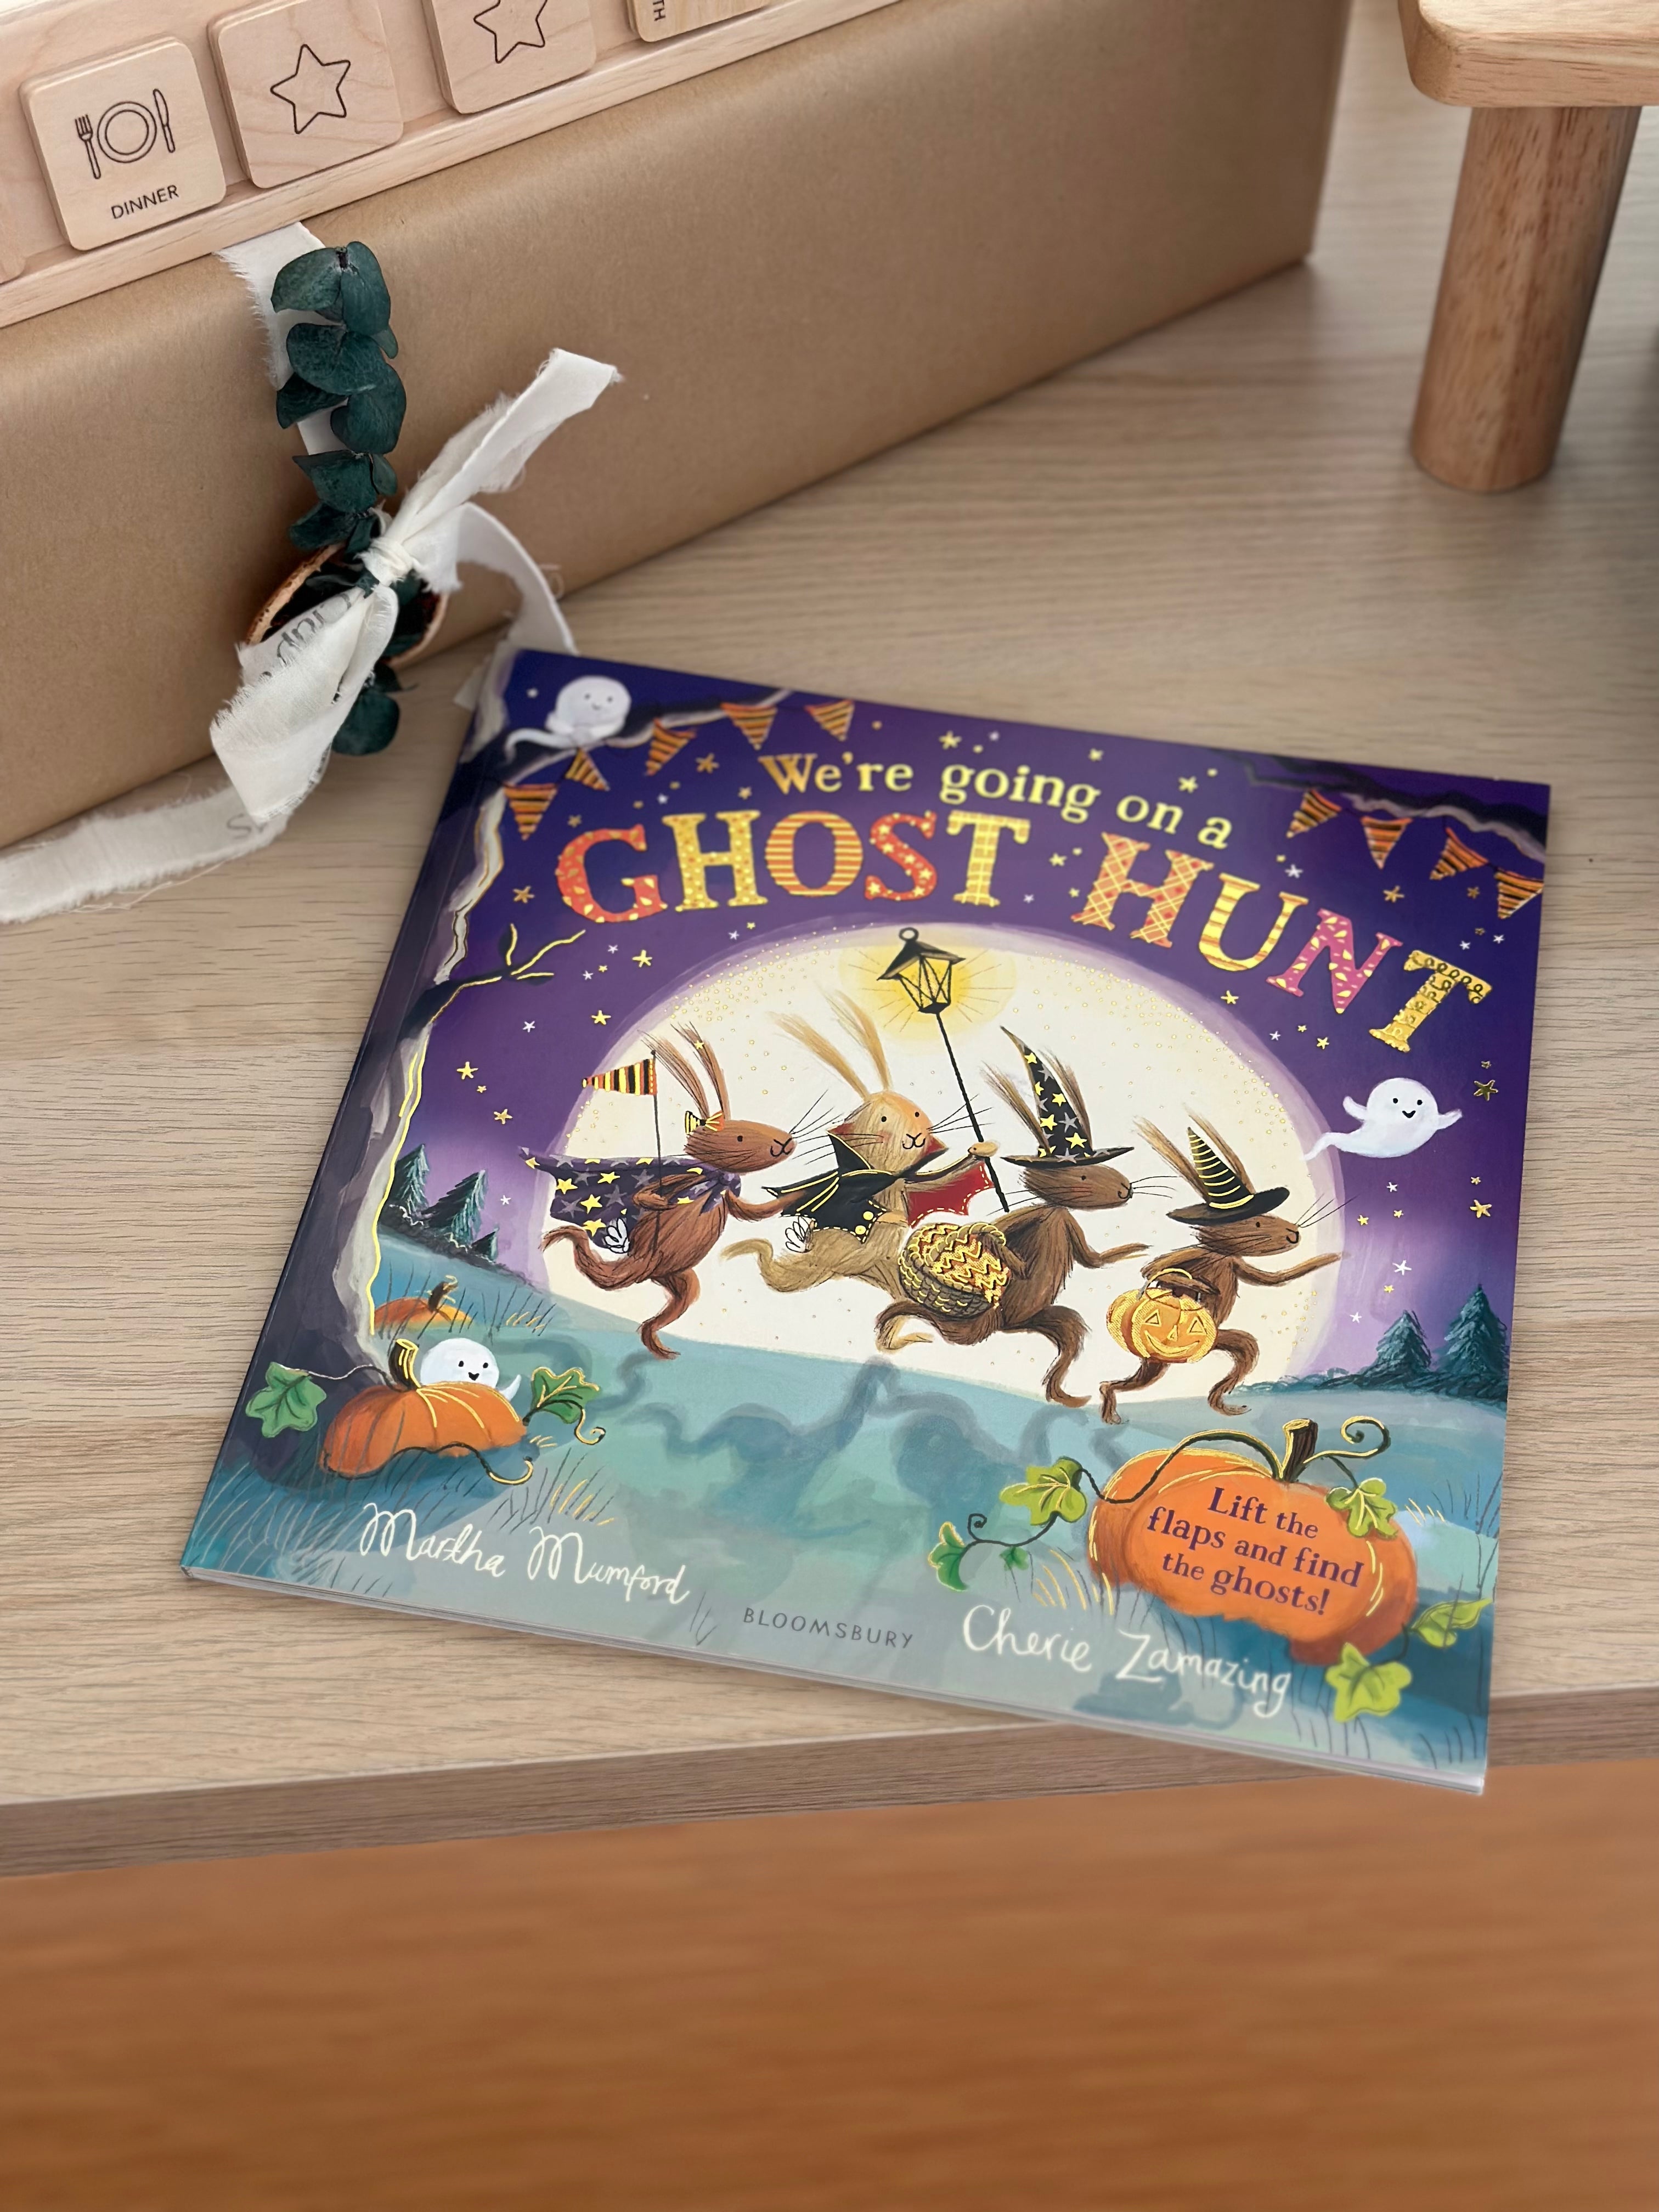 We're Going on a Ghost Hunt: A Lift-the-Flap Adventure [Book]